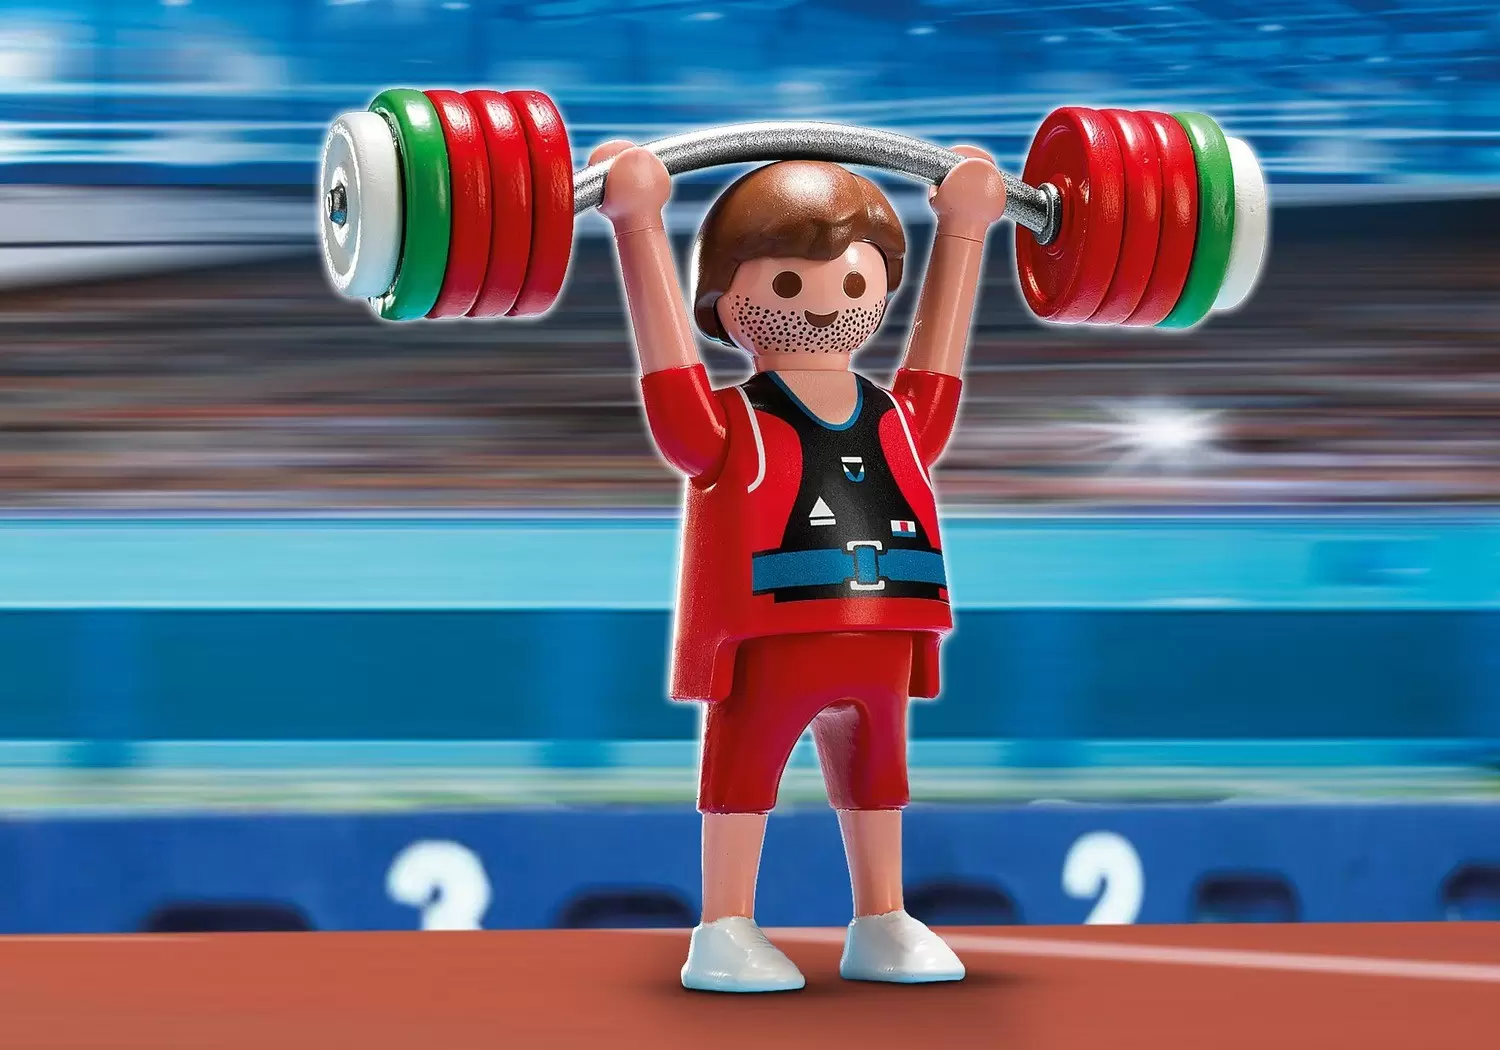 Playmobil Sports - Weightlifter